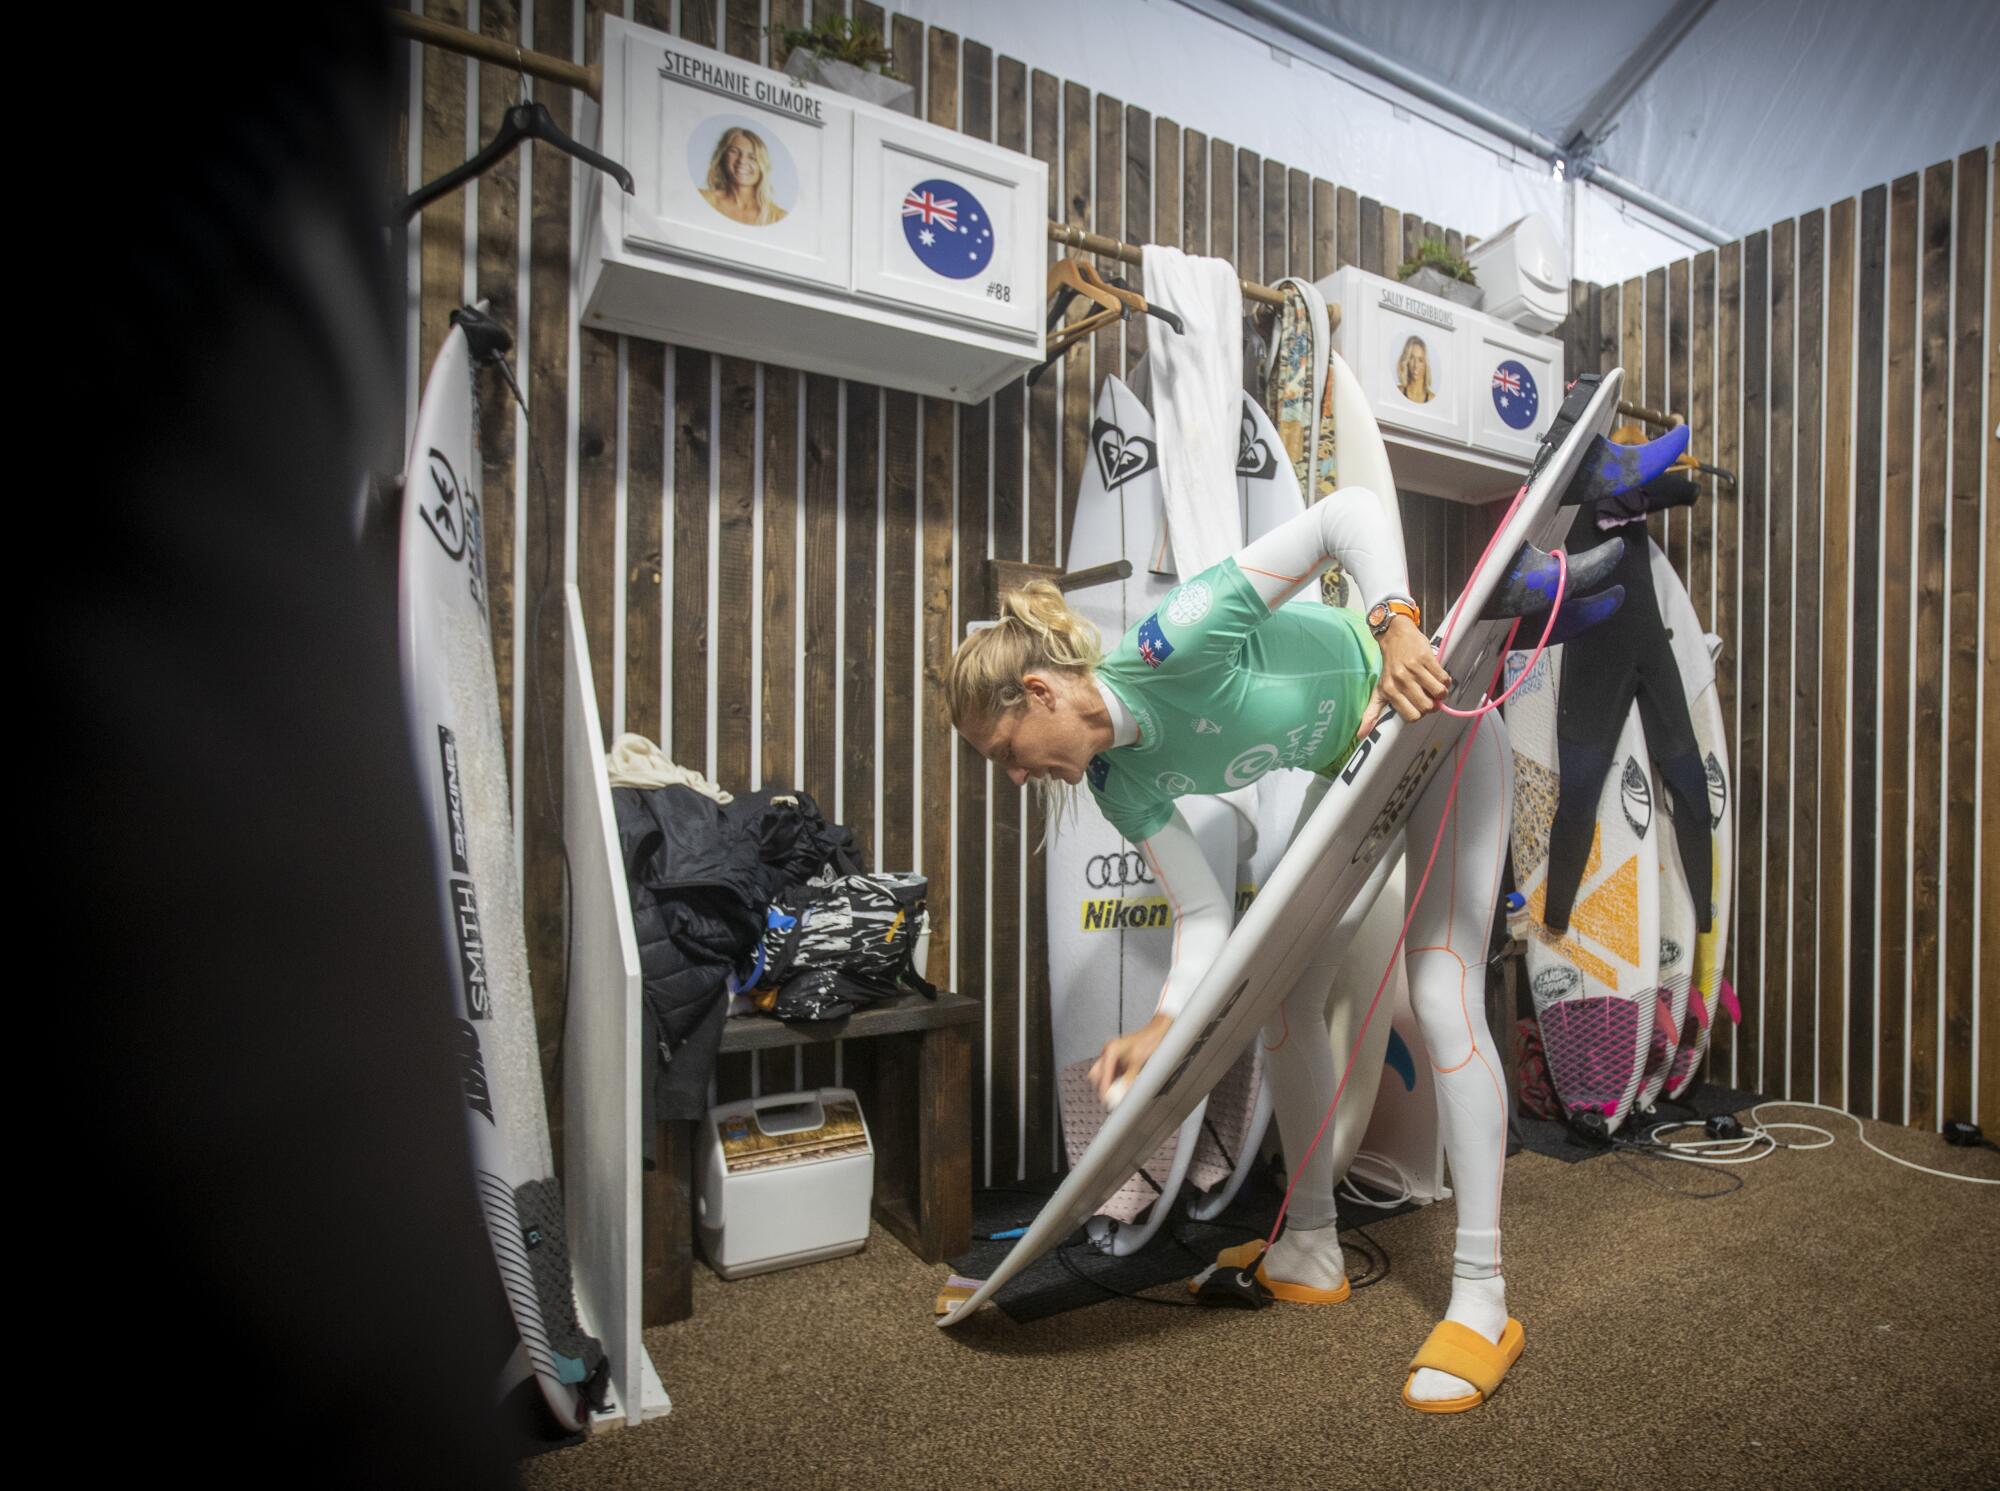 Stephanie Gilmore of Australia waxes up her board at the WSL Finals